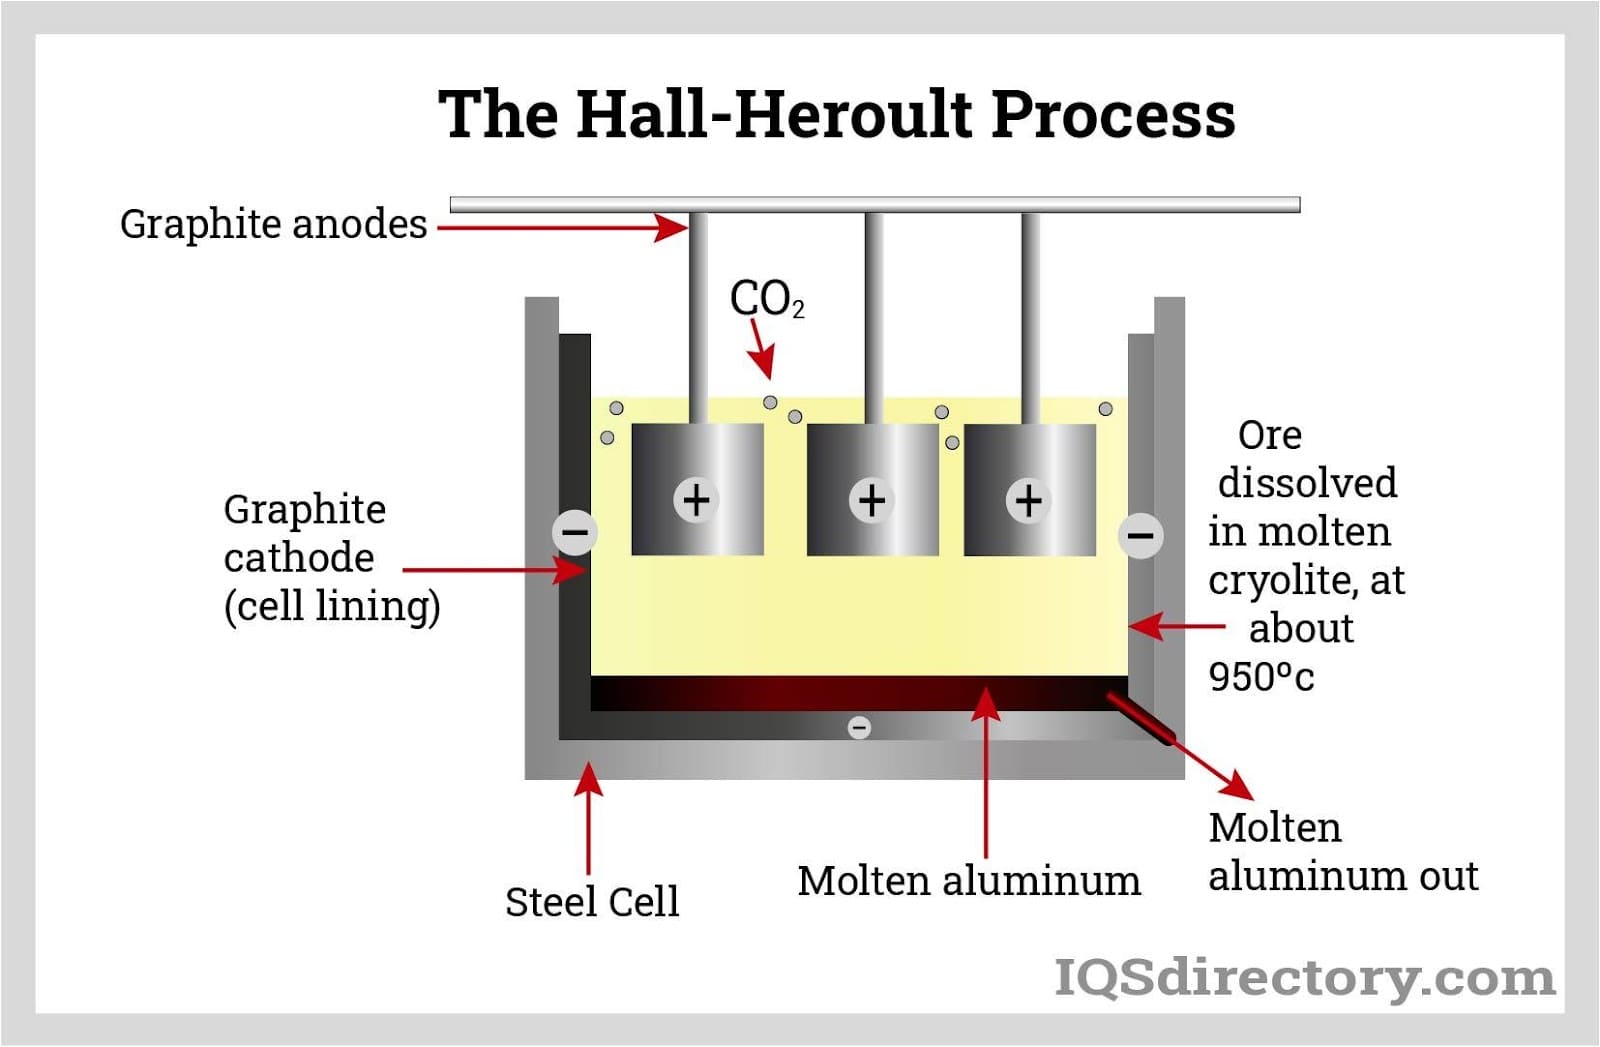 The Hall-Heroult Process